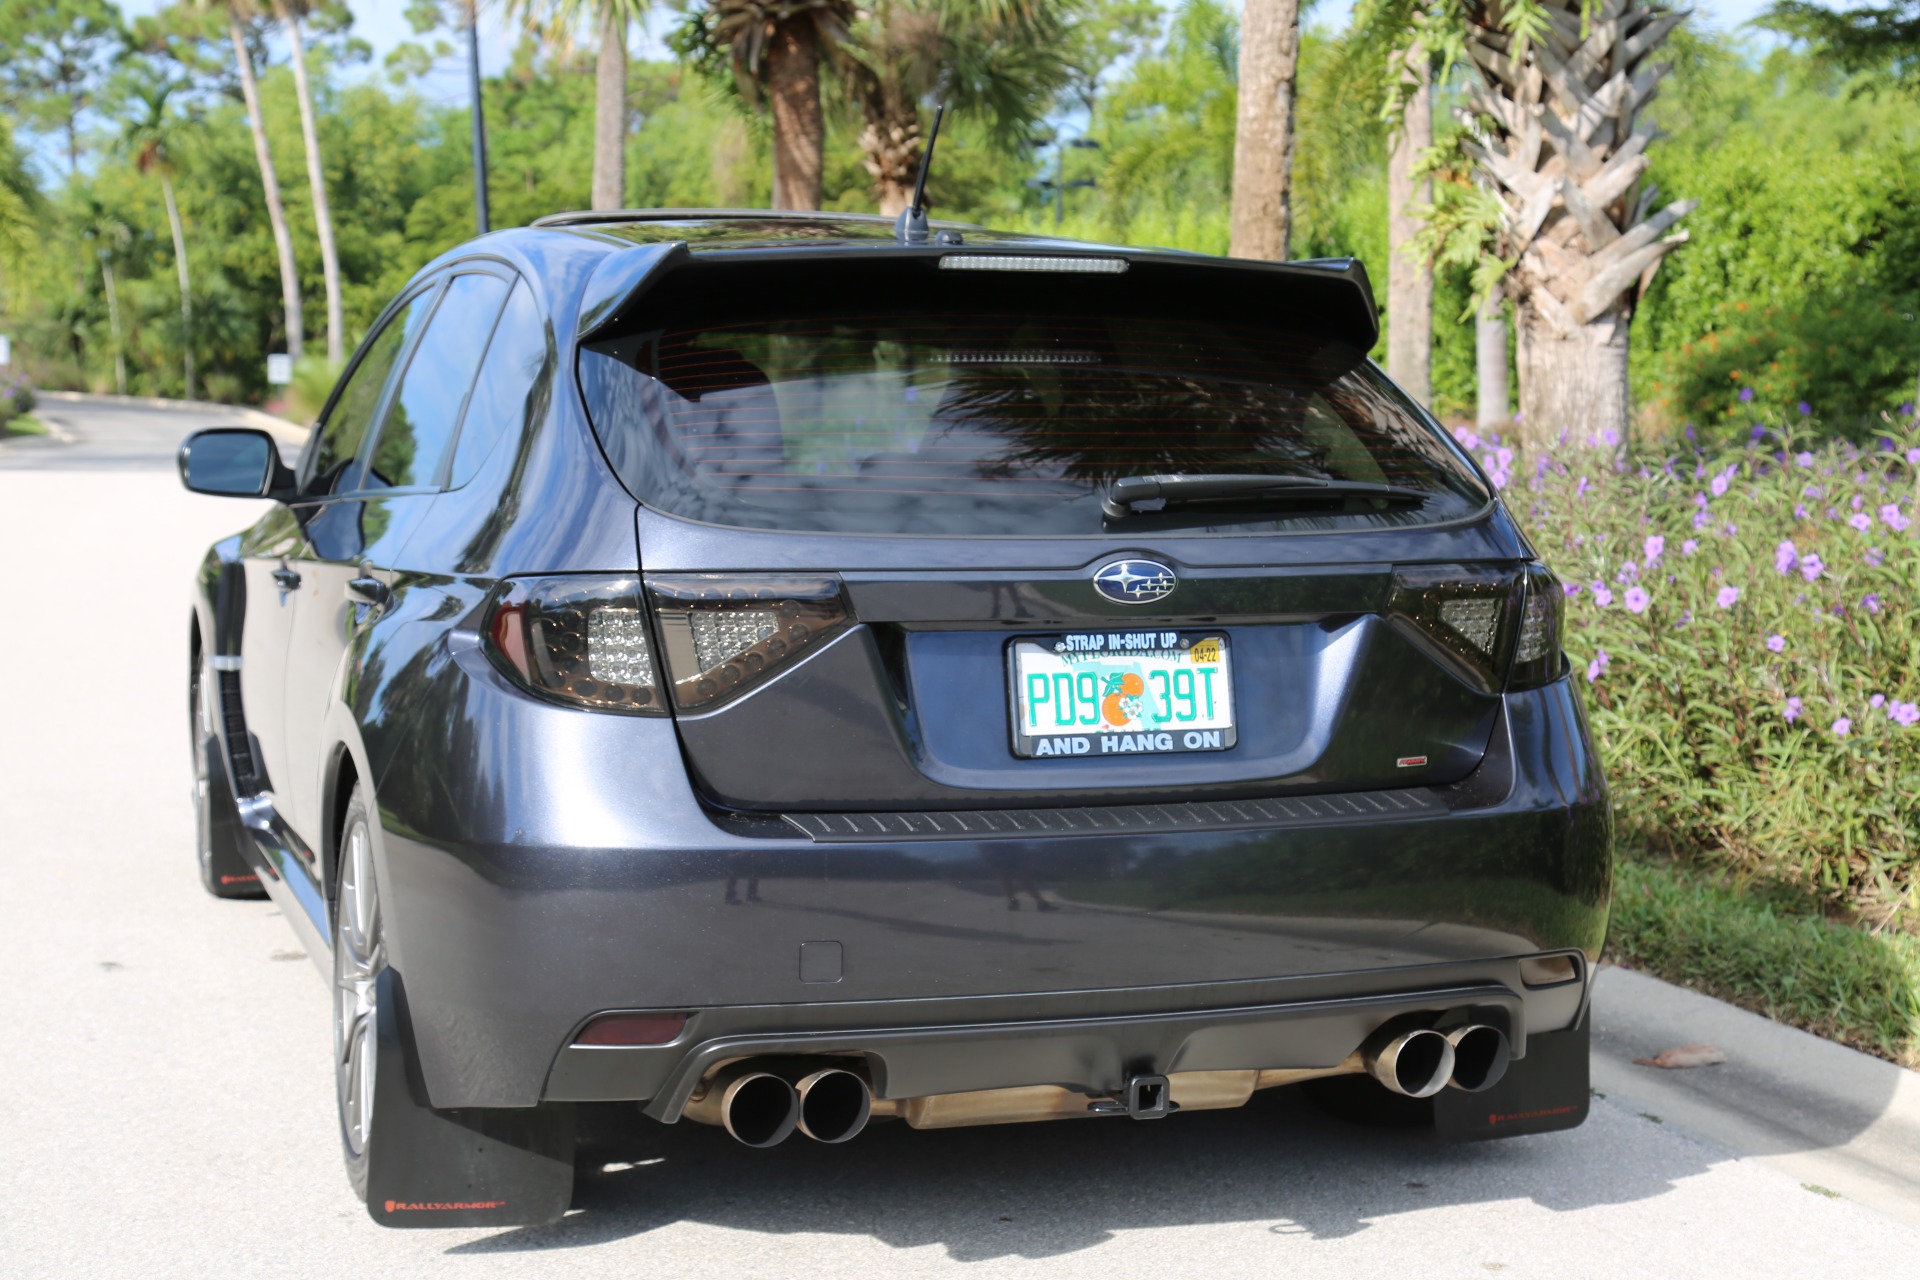 Used 2013 Subaru Impreza WRX Premium Hatch for sale Sold at Muscle Cars for Sale Inc. in Fort Myers FL 33912 5